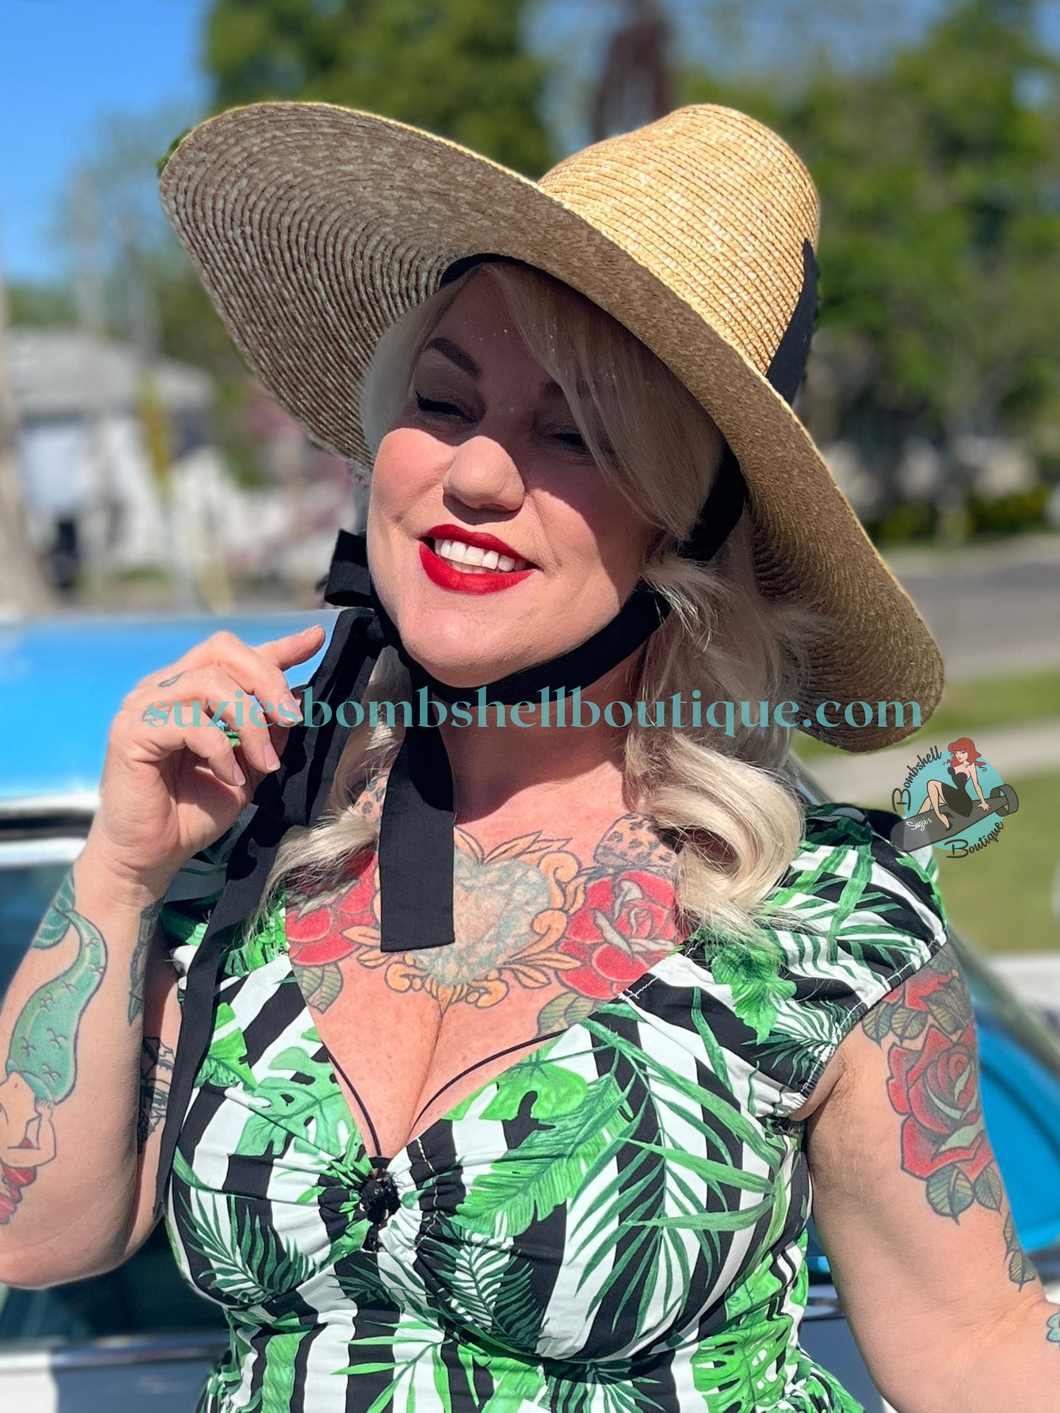 Bombshell Cottage Core Straw Hat cone shaped witch style country ladies summer hat for shade with ribbon to tie at chin retro vintage 40s 50s pinup goth hat Canadian Pin-Up Shop Suzie's Bombshell Boutique